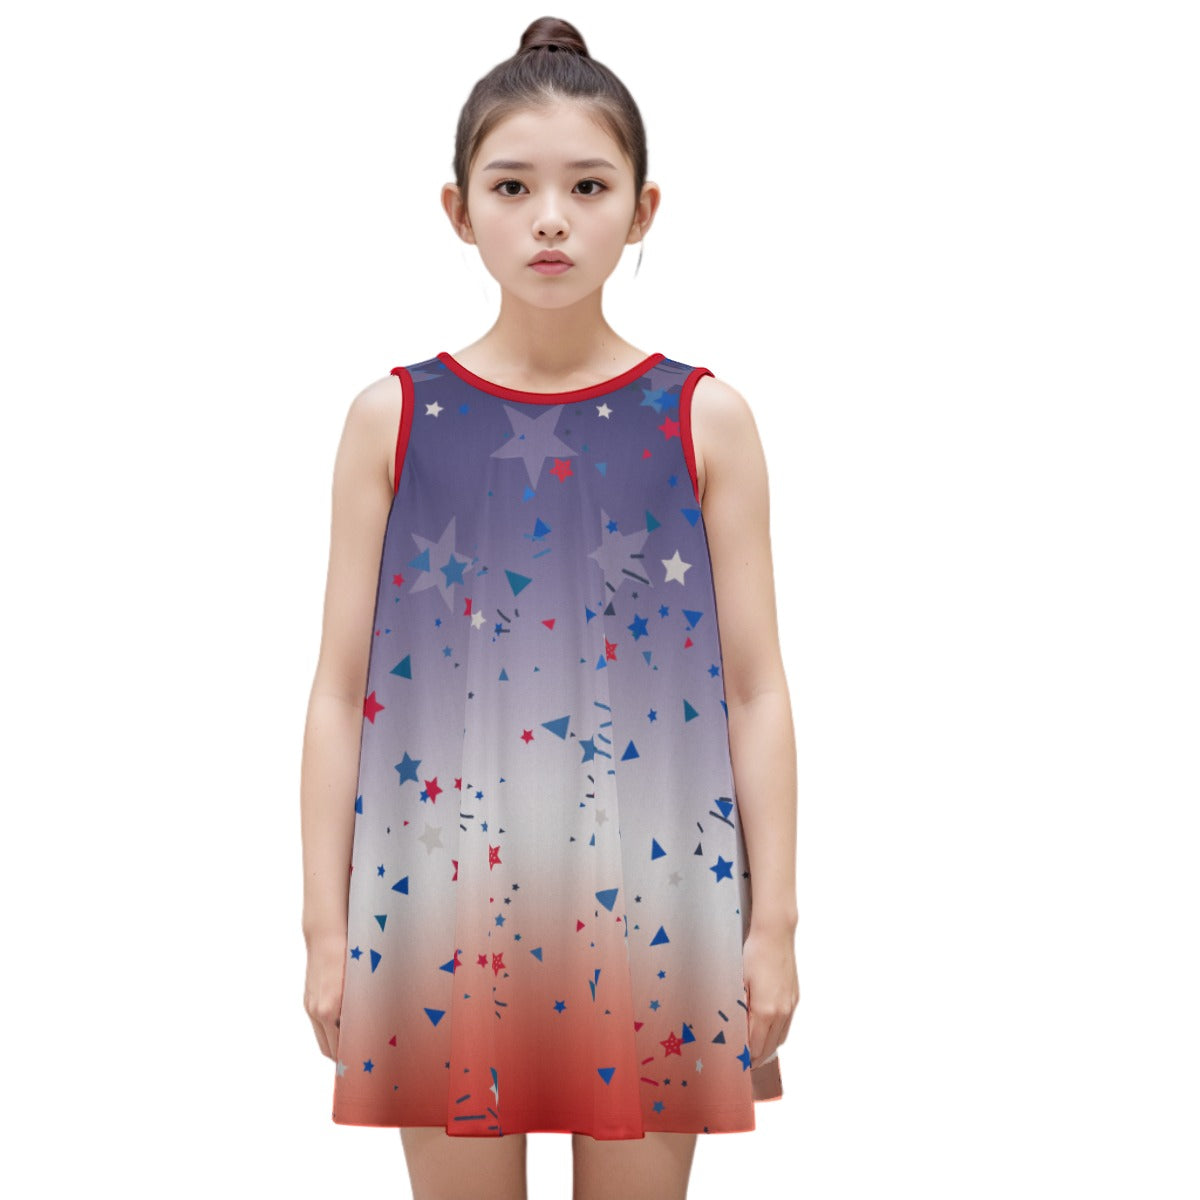 RED/WHITE/BLUE Ombre Patriotic Kid's Sleeveless Dress | 100% Cotton - girl's dress at TFC&H Co.